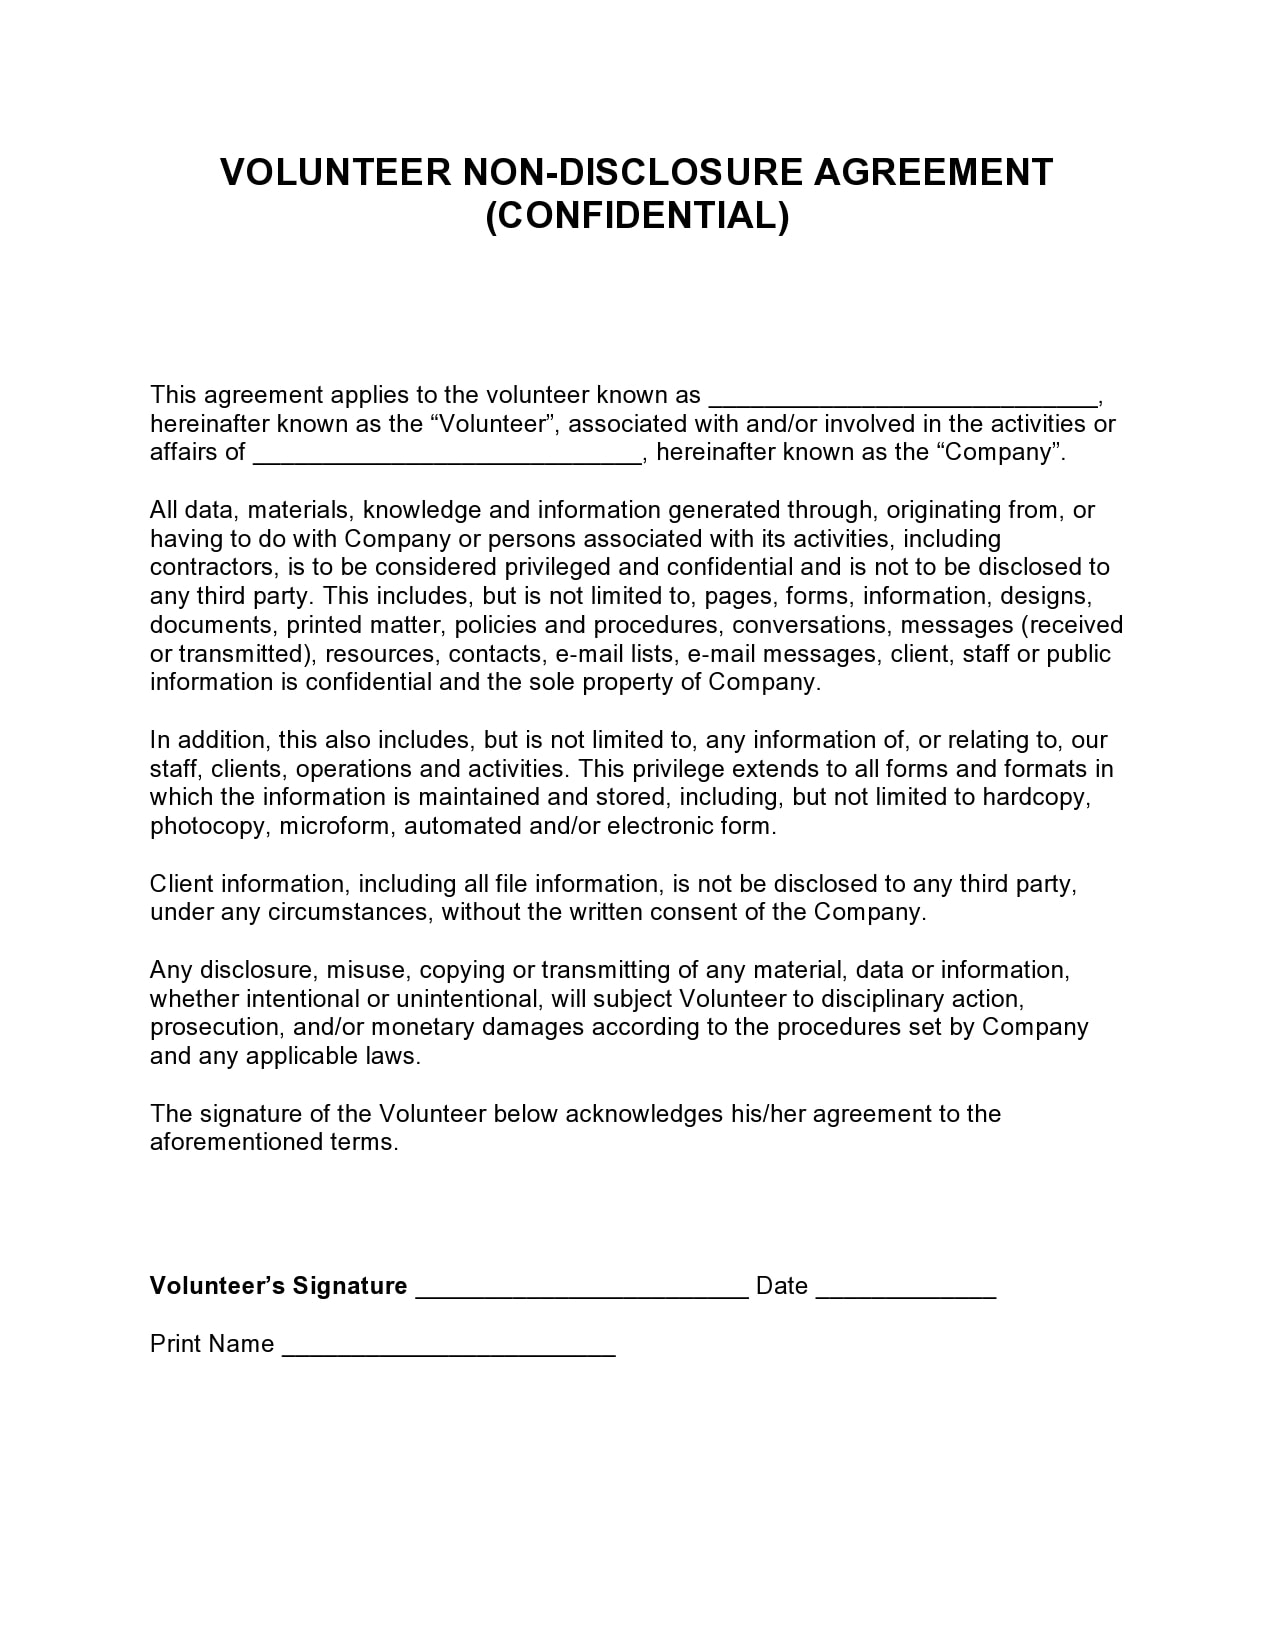 21 Free Confidentiality Agreement Templates (NDA) - TemplateArchive With accountant confidentiality agreement template